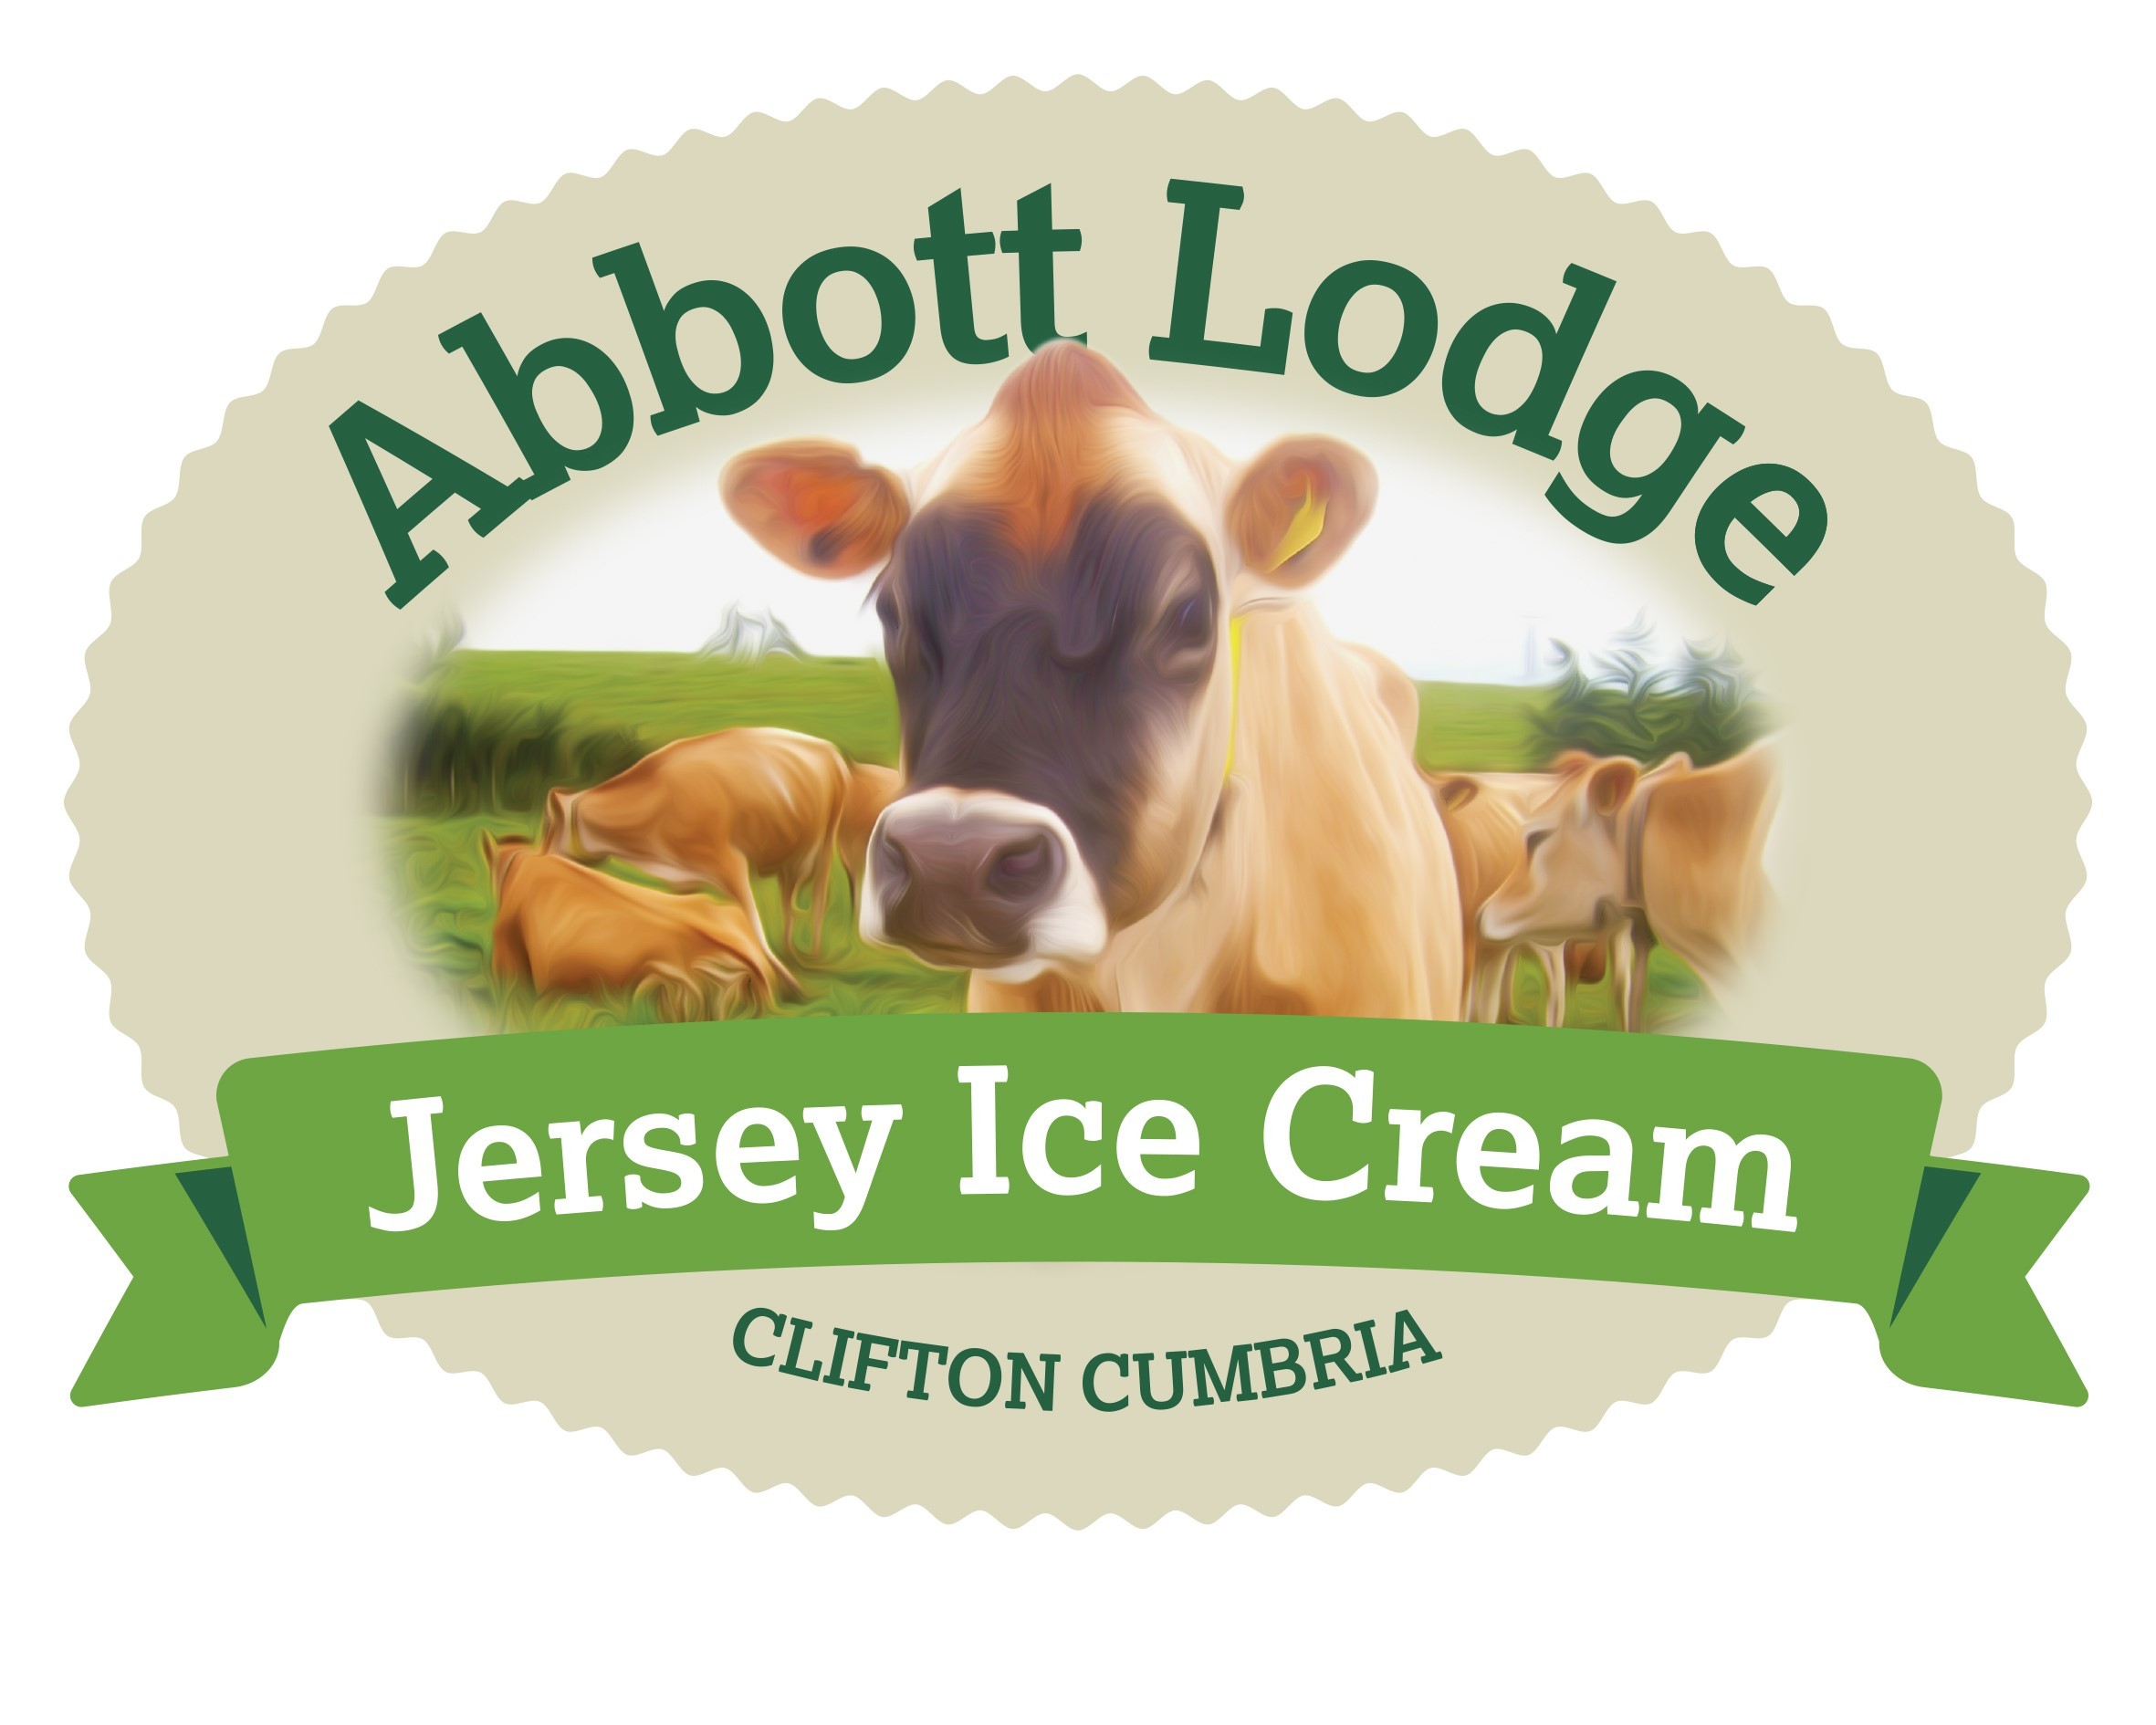 Now locally famous the Blands Abbott Lodge ice-cream comes in a wide variety of flavours